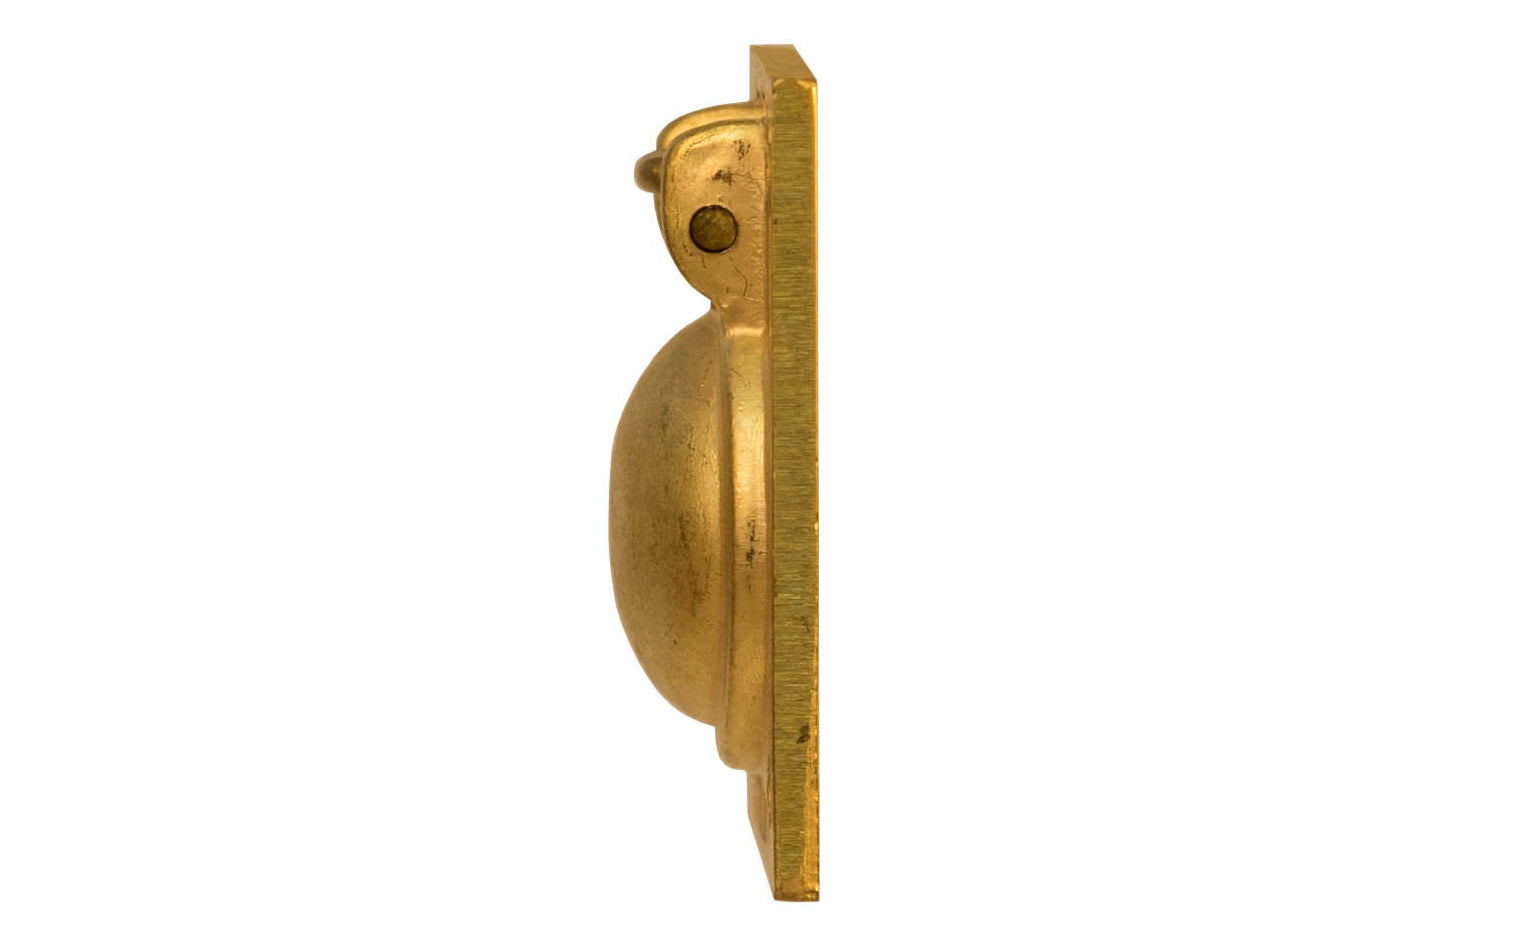 A classic & traditional flush mount recessed ring pull. High quality solid brass, this finger ring pull is thick & stout for durability. For sliding cabinet doors, trap doors, hatches, small boxes, etc. 1-3/4" high x 1-7/16" wide. Recess Finger Pull